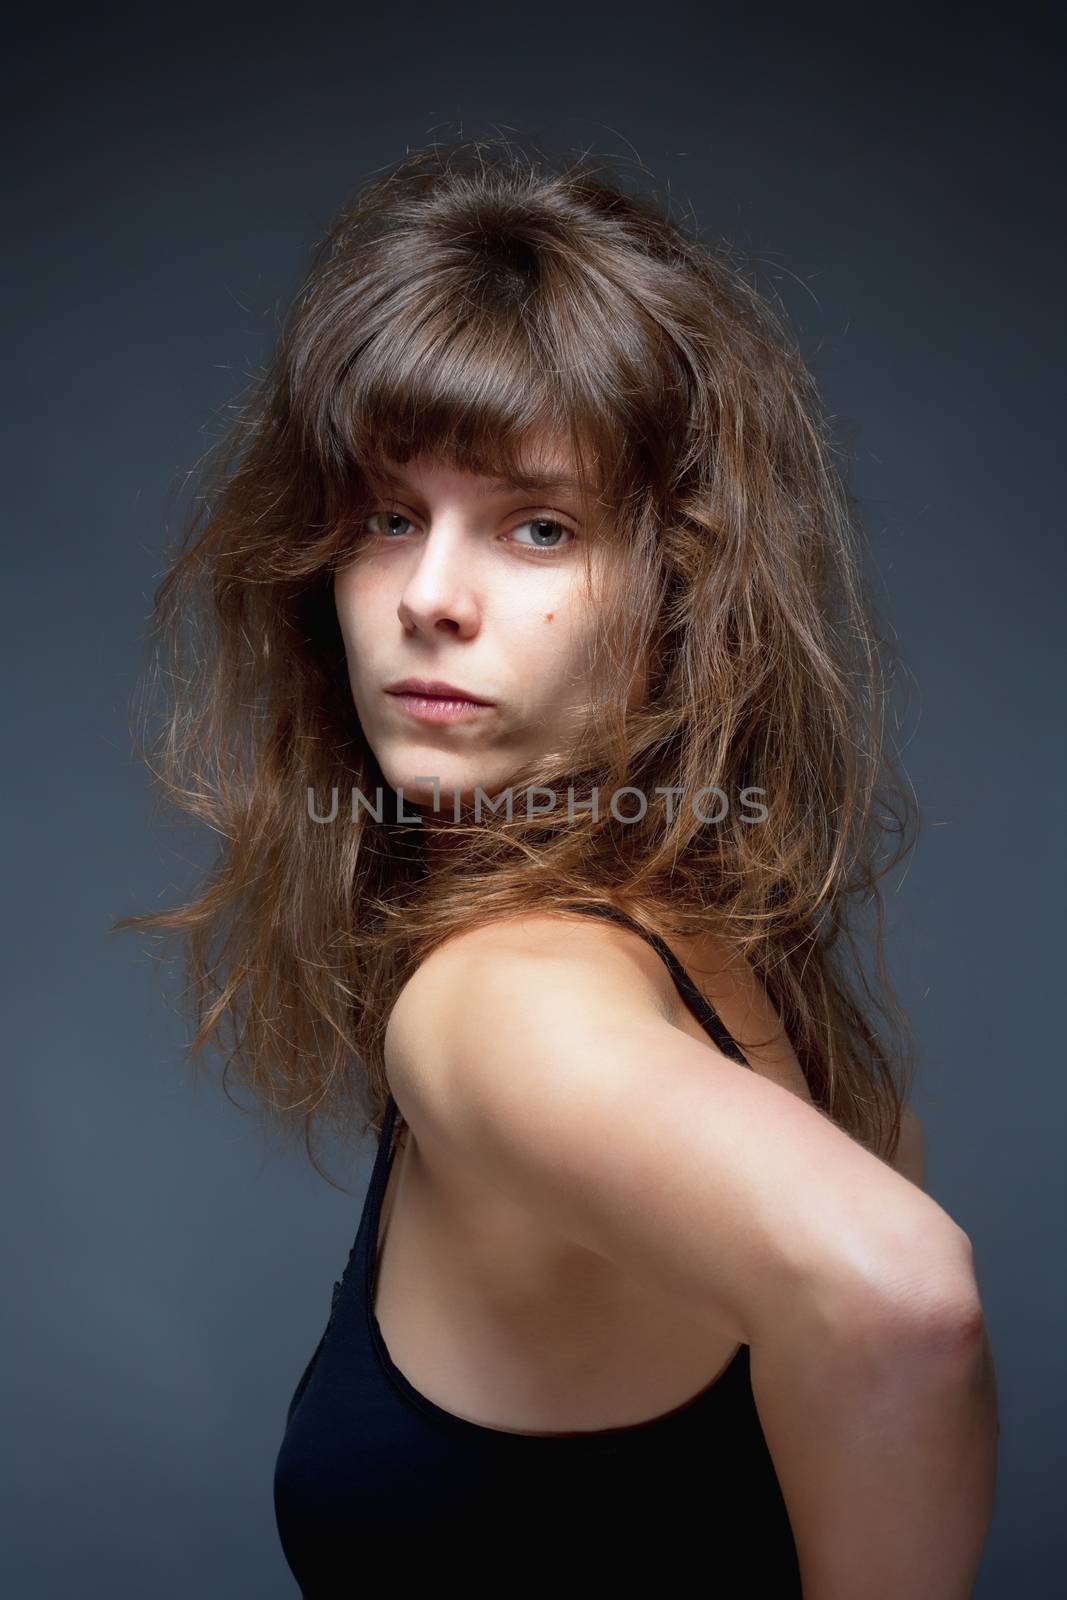 Portrait of a Young Sensual Woman with Brown Hair